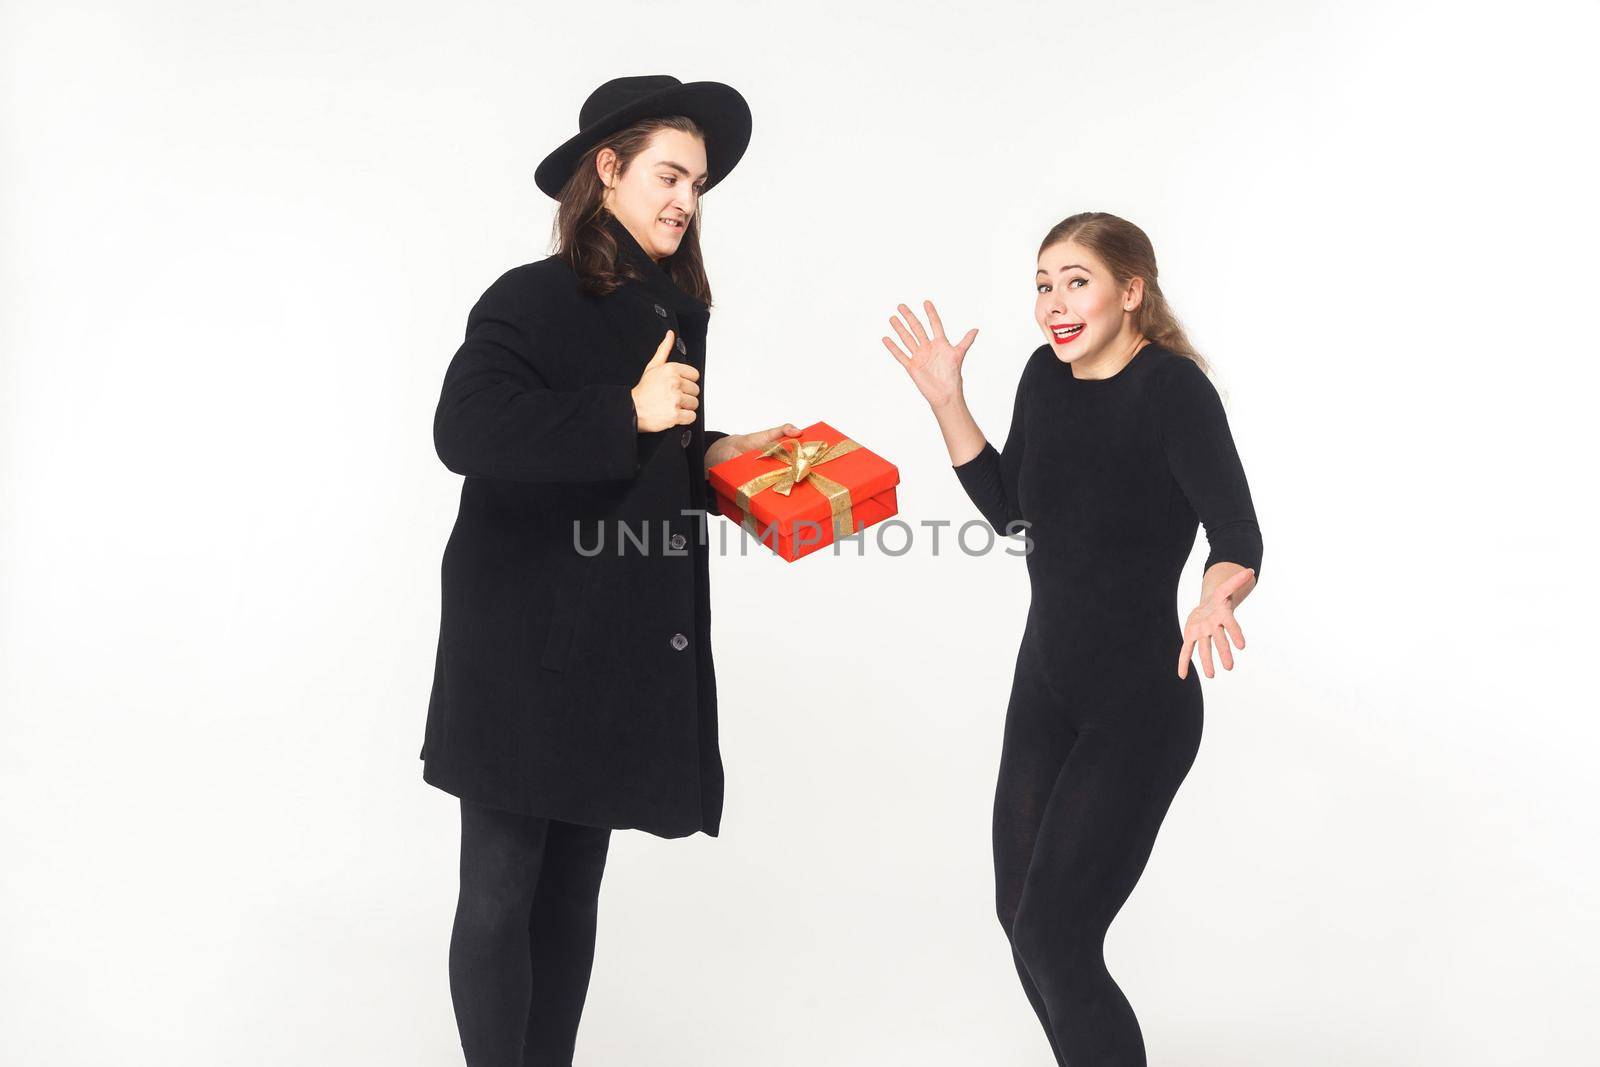 Man in coat and hat present gift box confused woman. Studio shot, isolated on white background